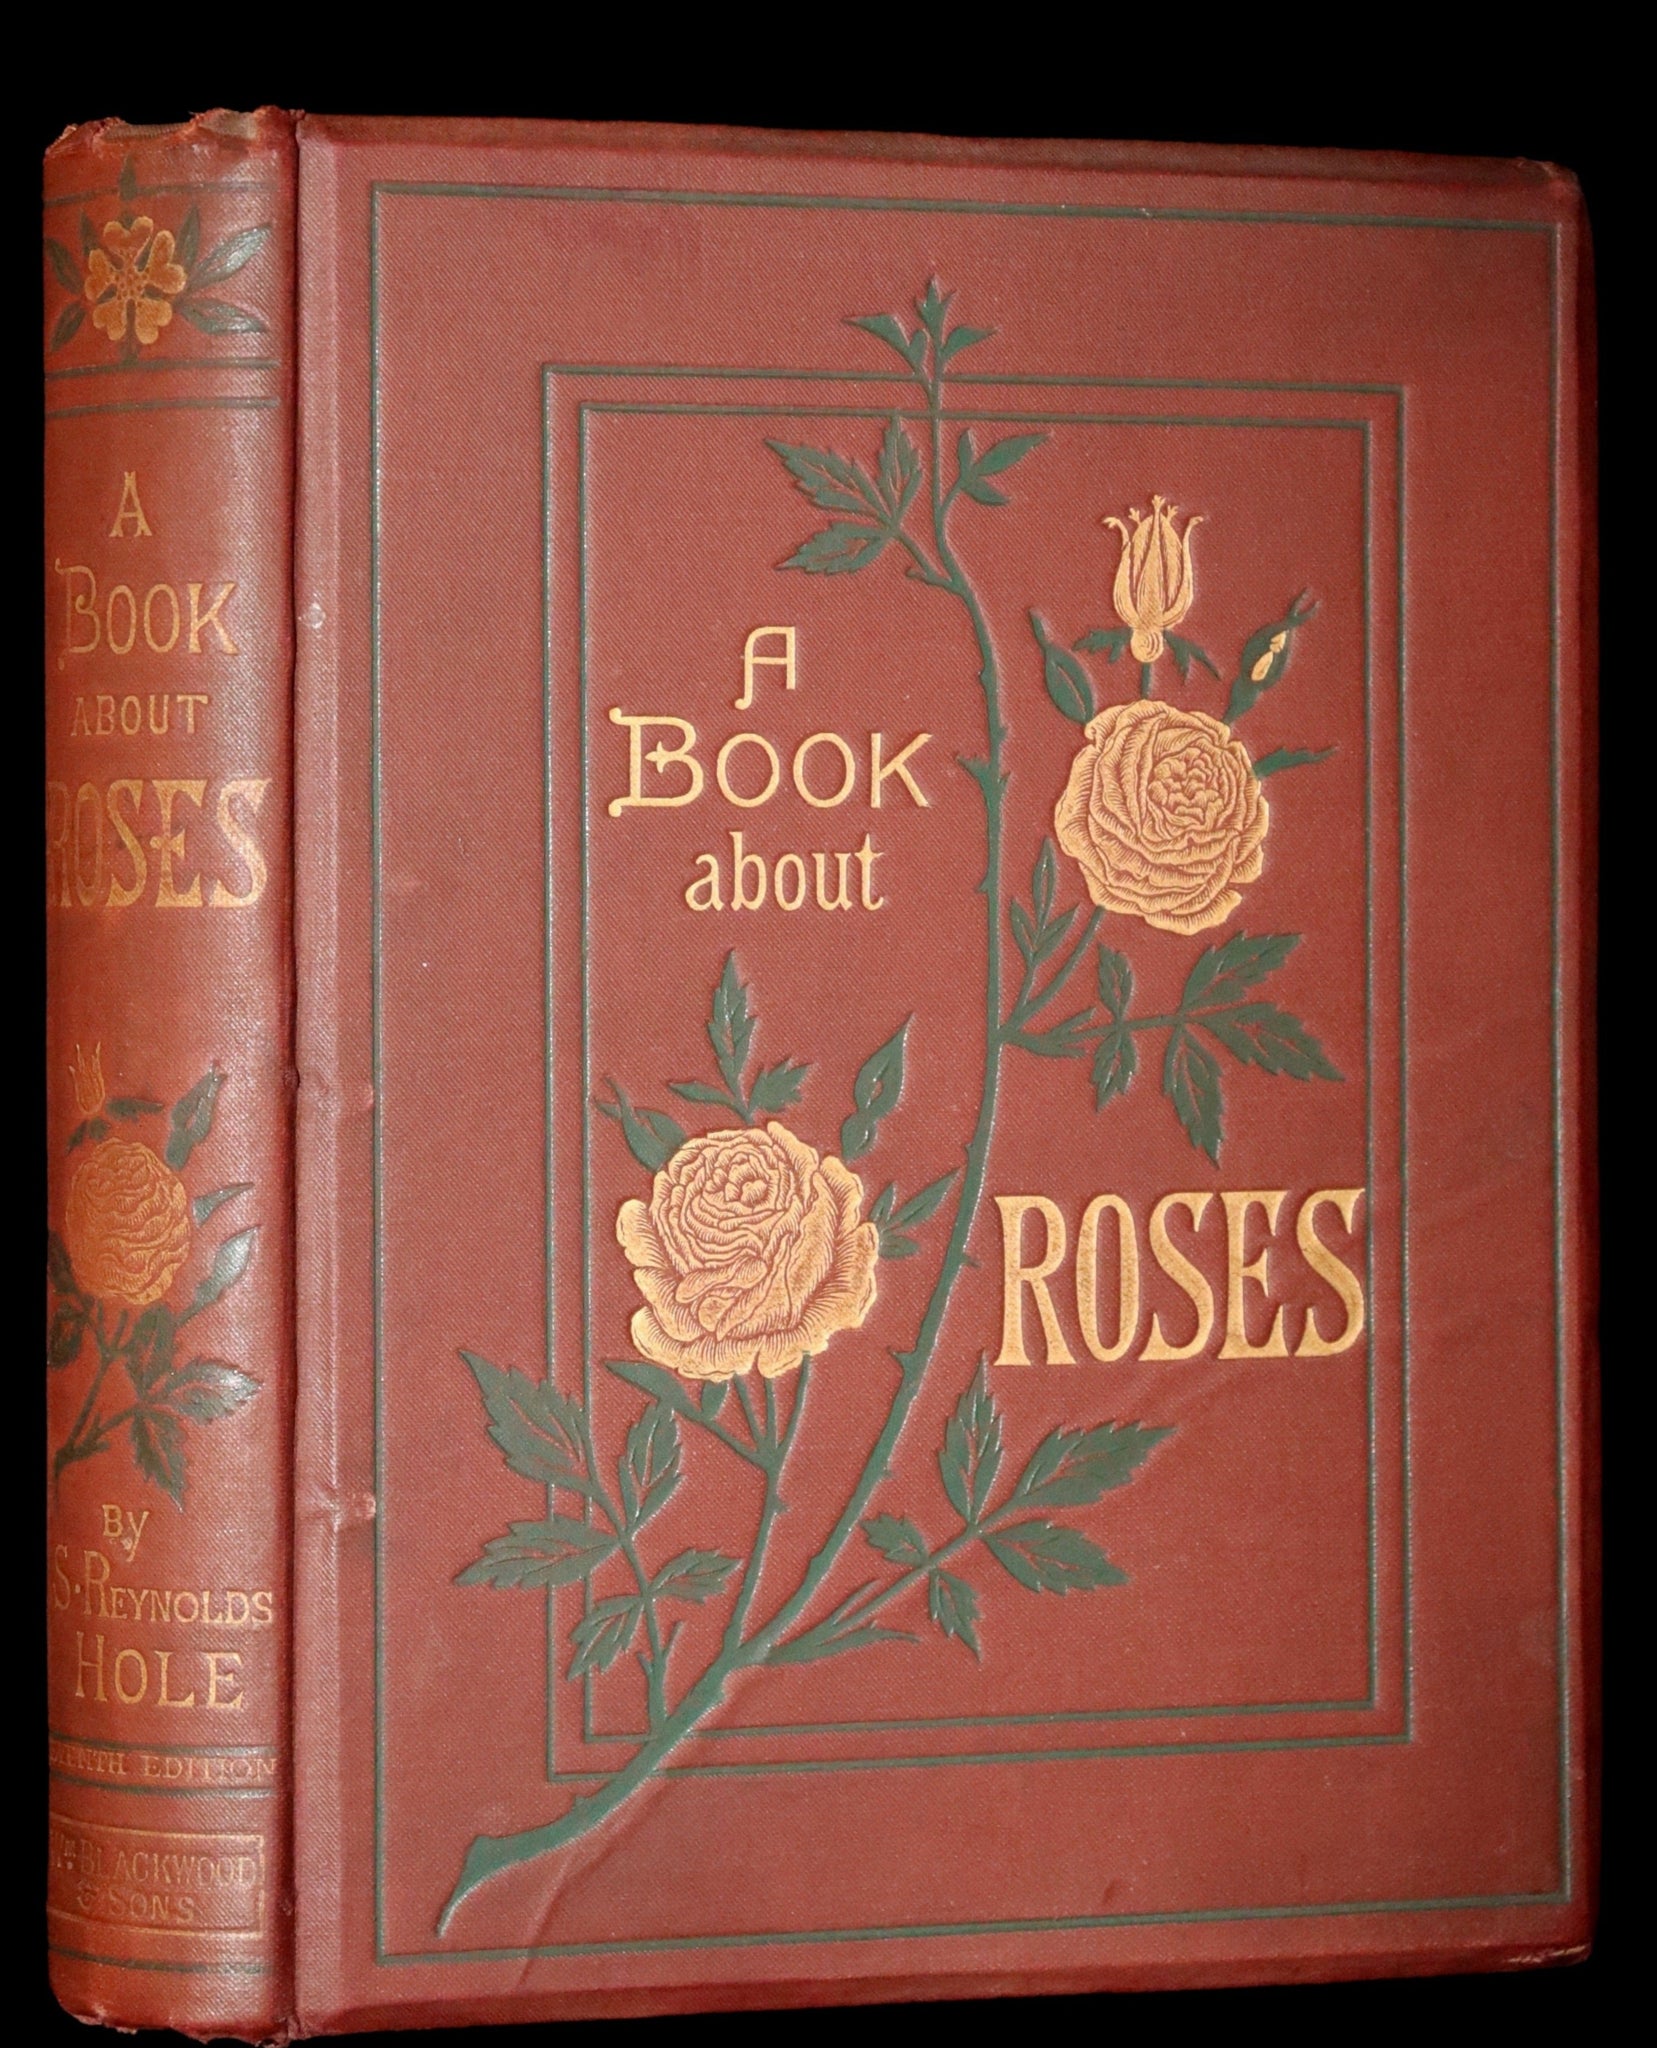 1880 Rare Victorian Gardening Book - A Book about ROSES, How to grow and show them.